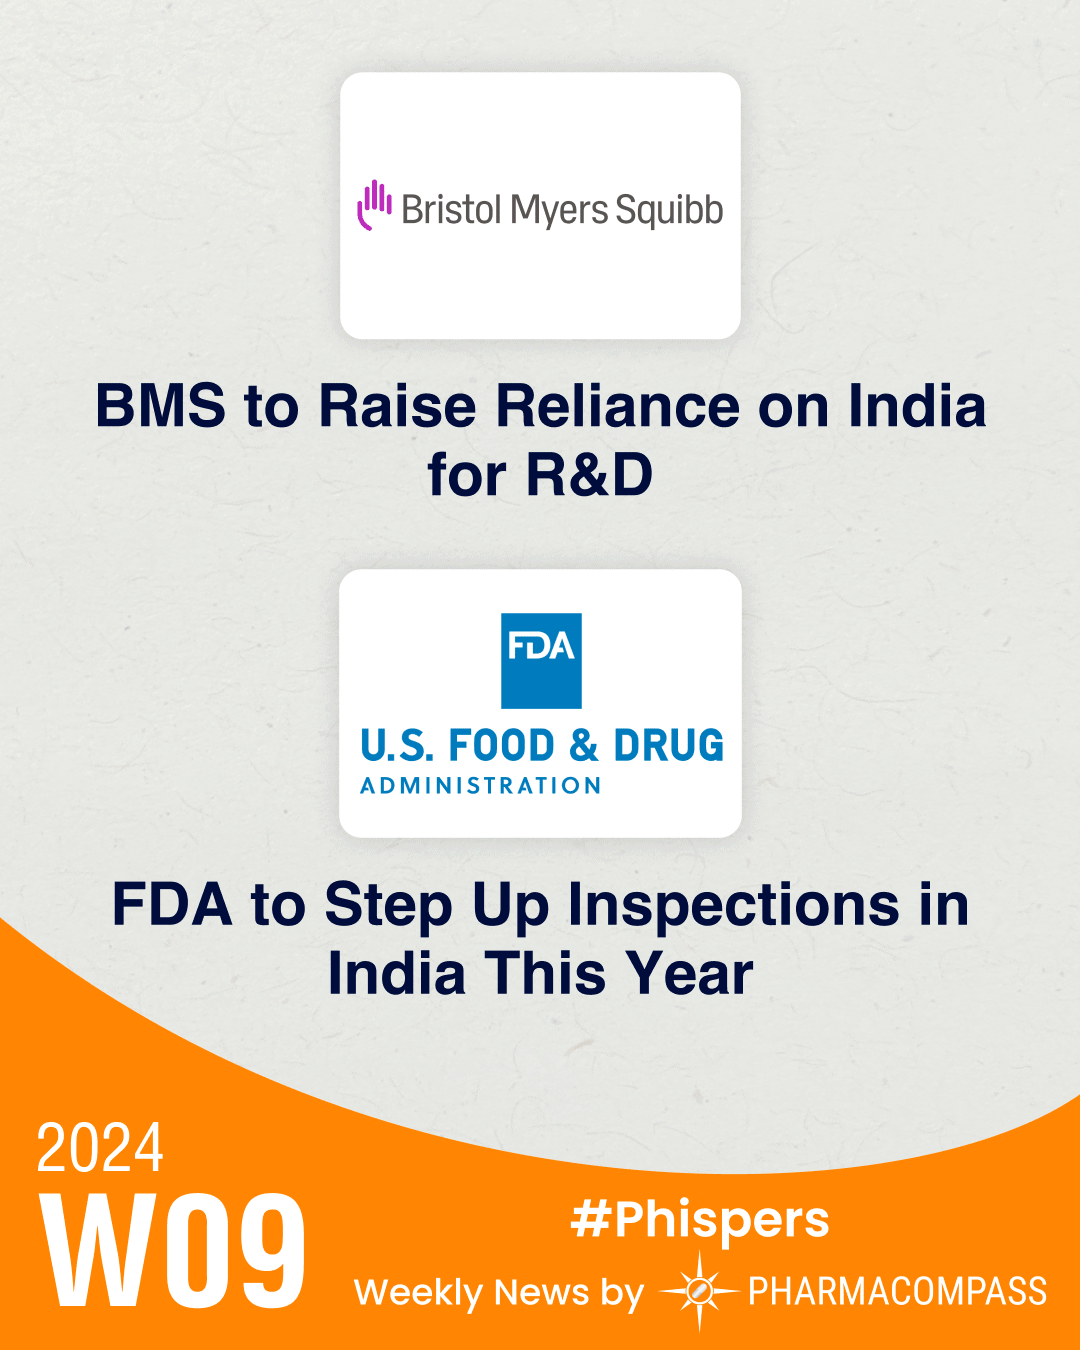 India to have BMS’ largest R&D facility after US; its drug plants to face increased FDA inspections